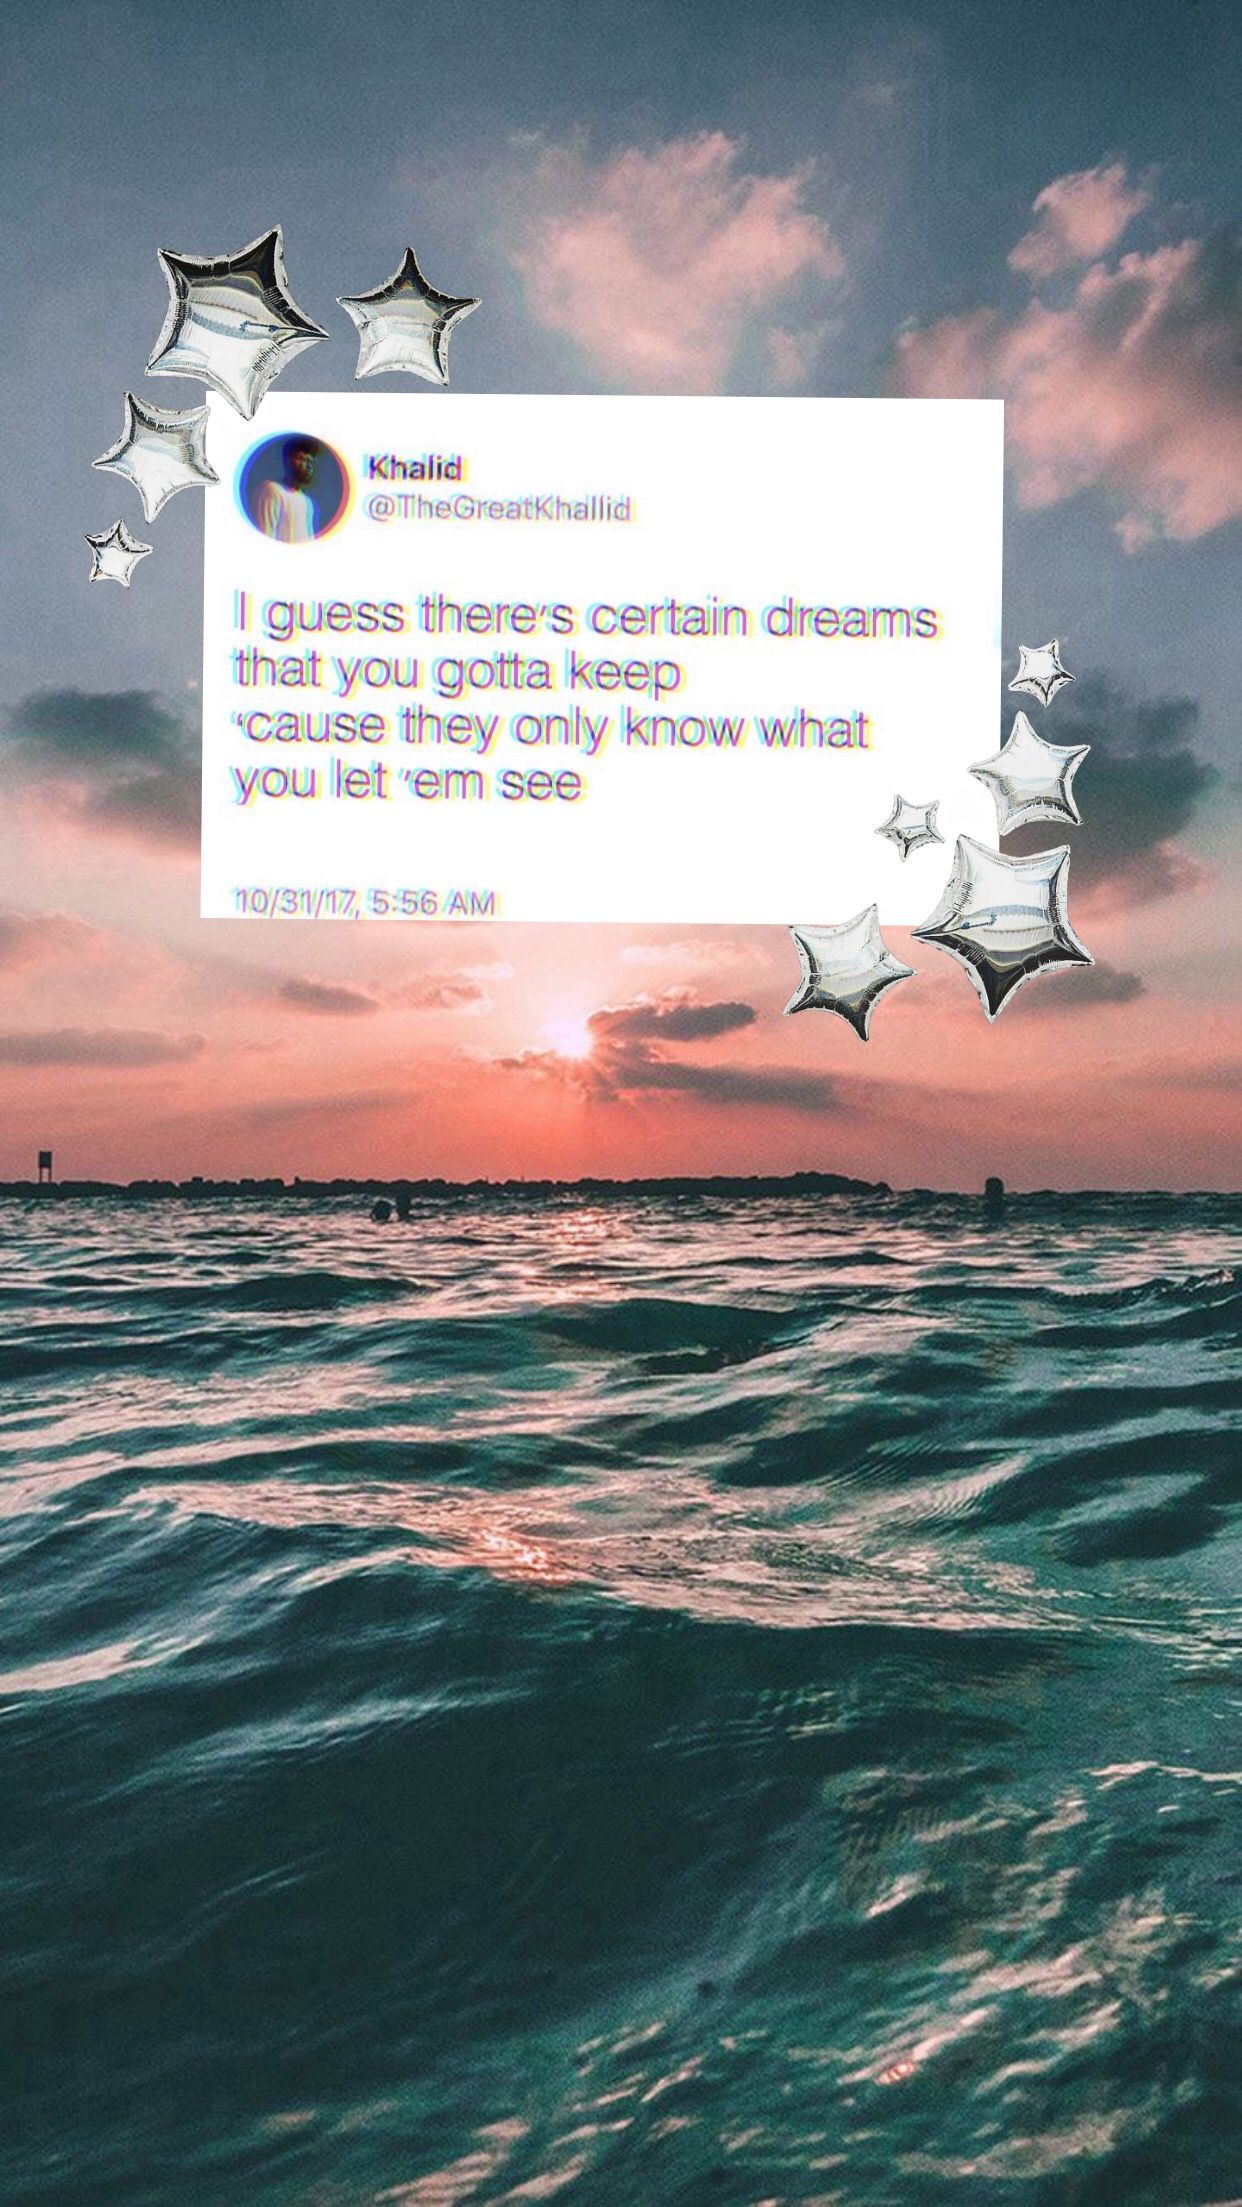 Here's a wallpaper:) Khalid inspires me so much. #wallpaper #tweets #sunset. Khalid quotes, Tweet quotes, Wallpaper quotes